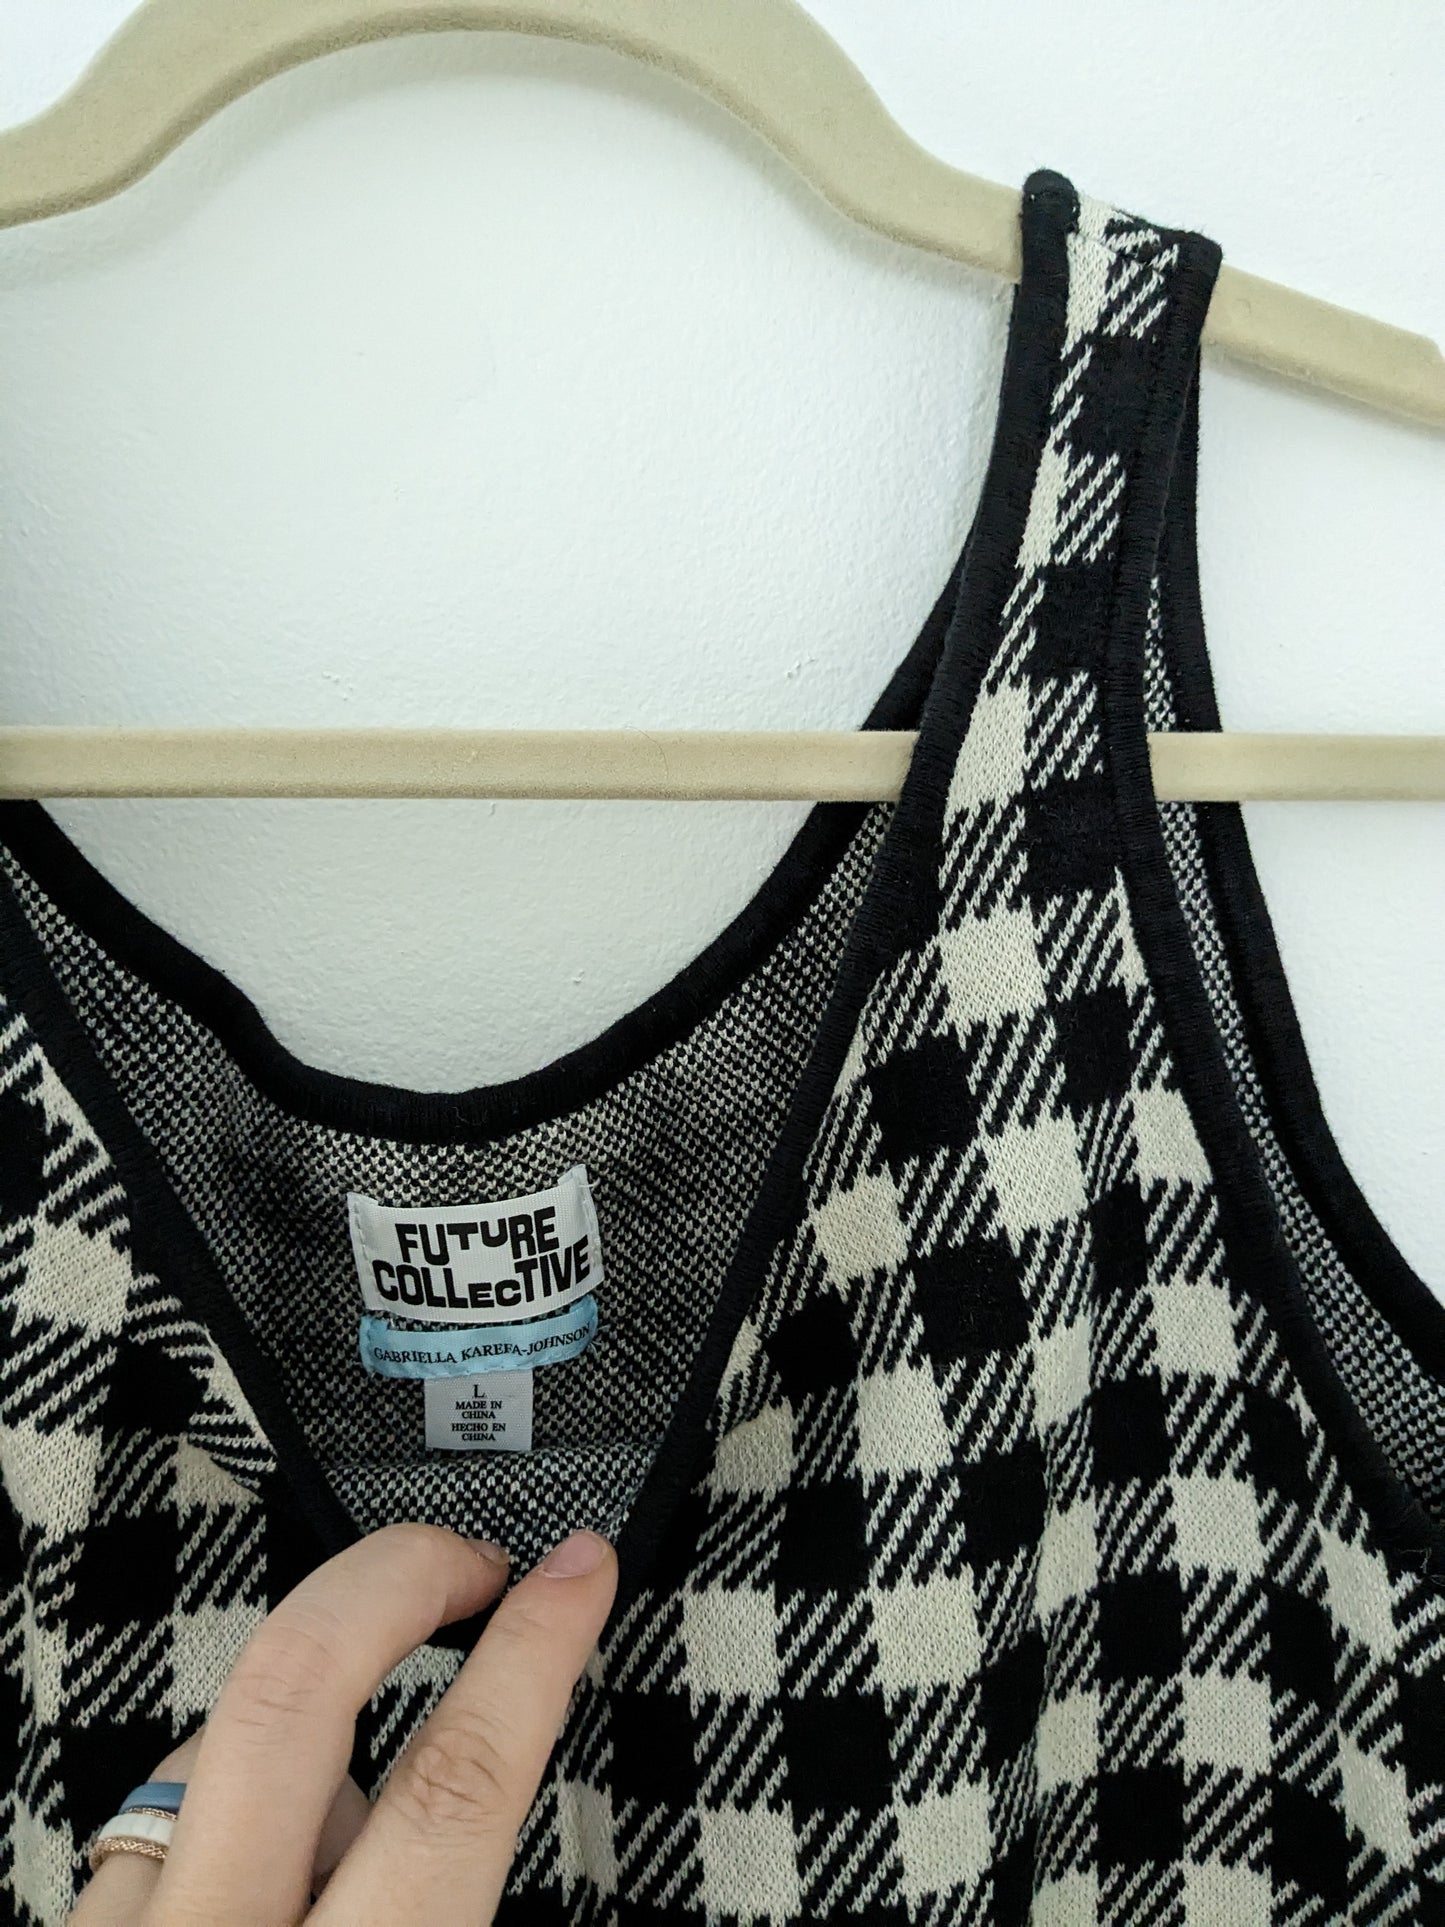 NWOT Future Collective black and white checker cropped tank | Size L